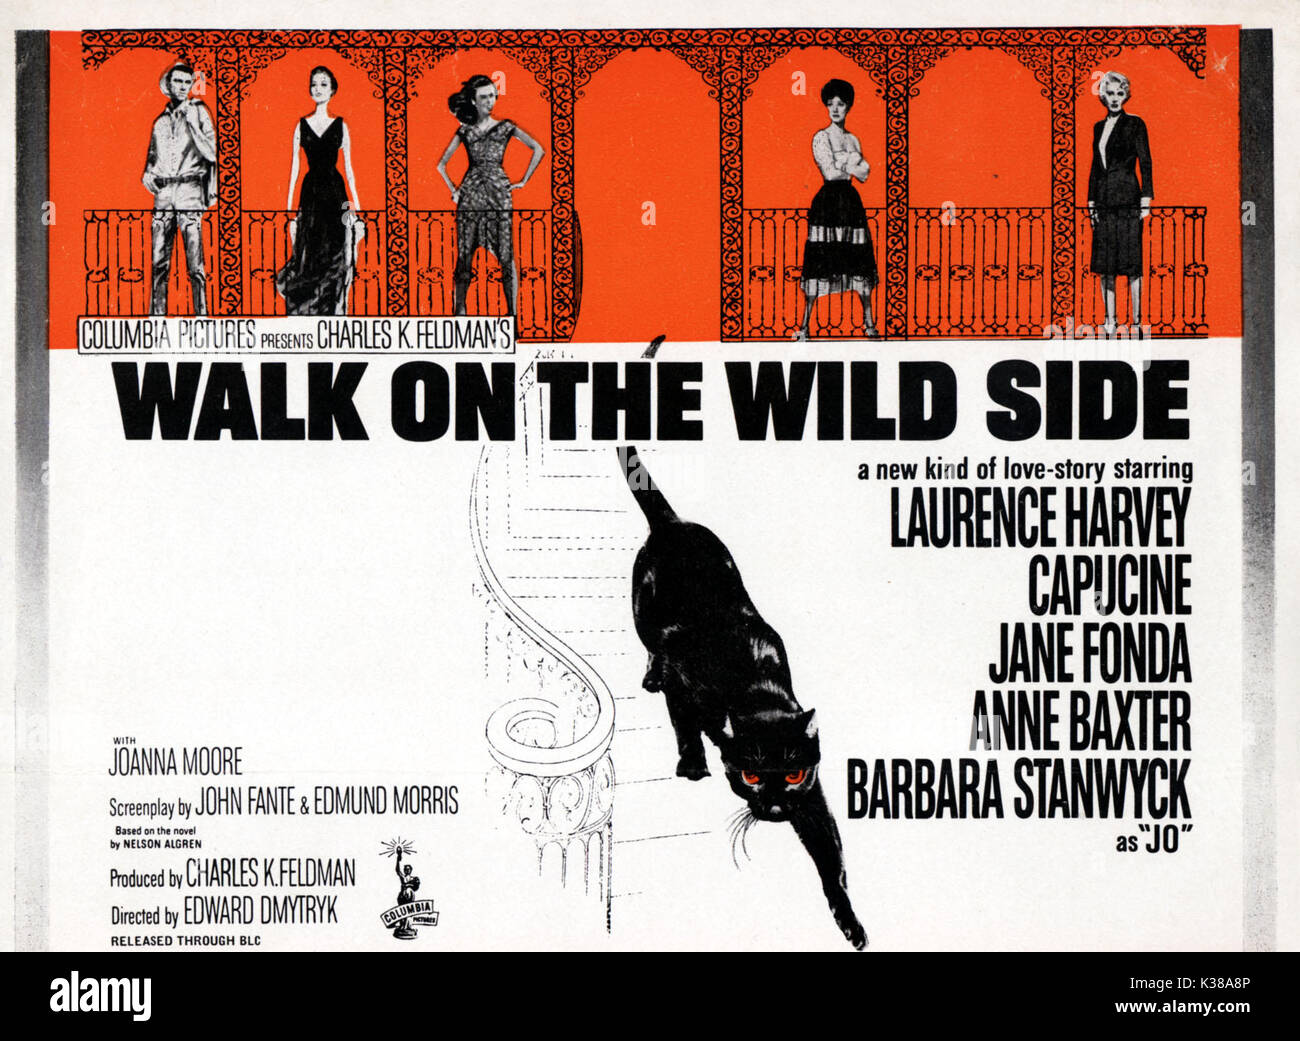 Walk On The Wild Side Poster Date 1962 Stock Photo 156920982 Alamy